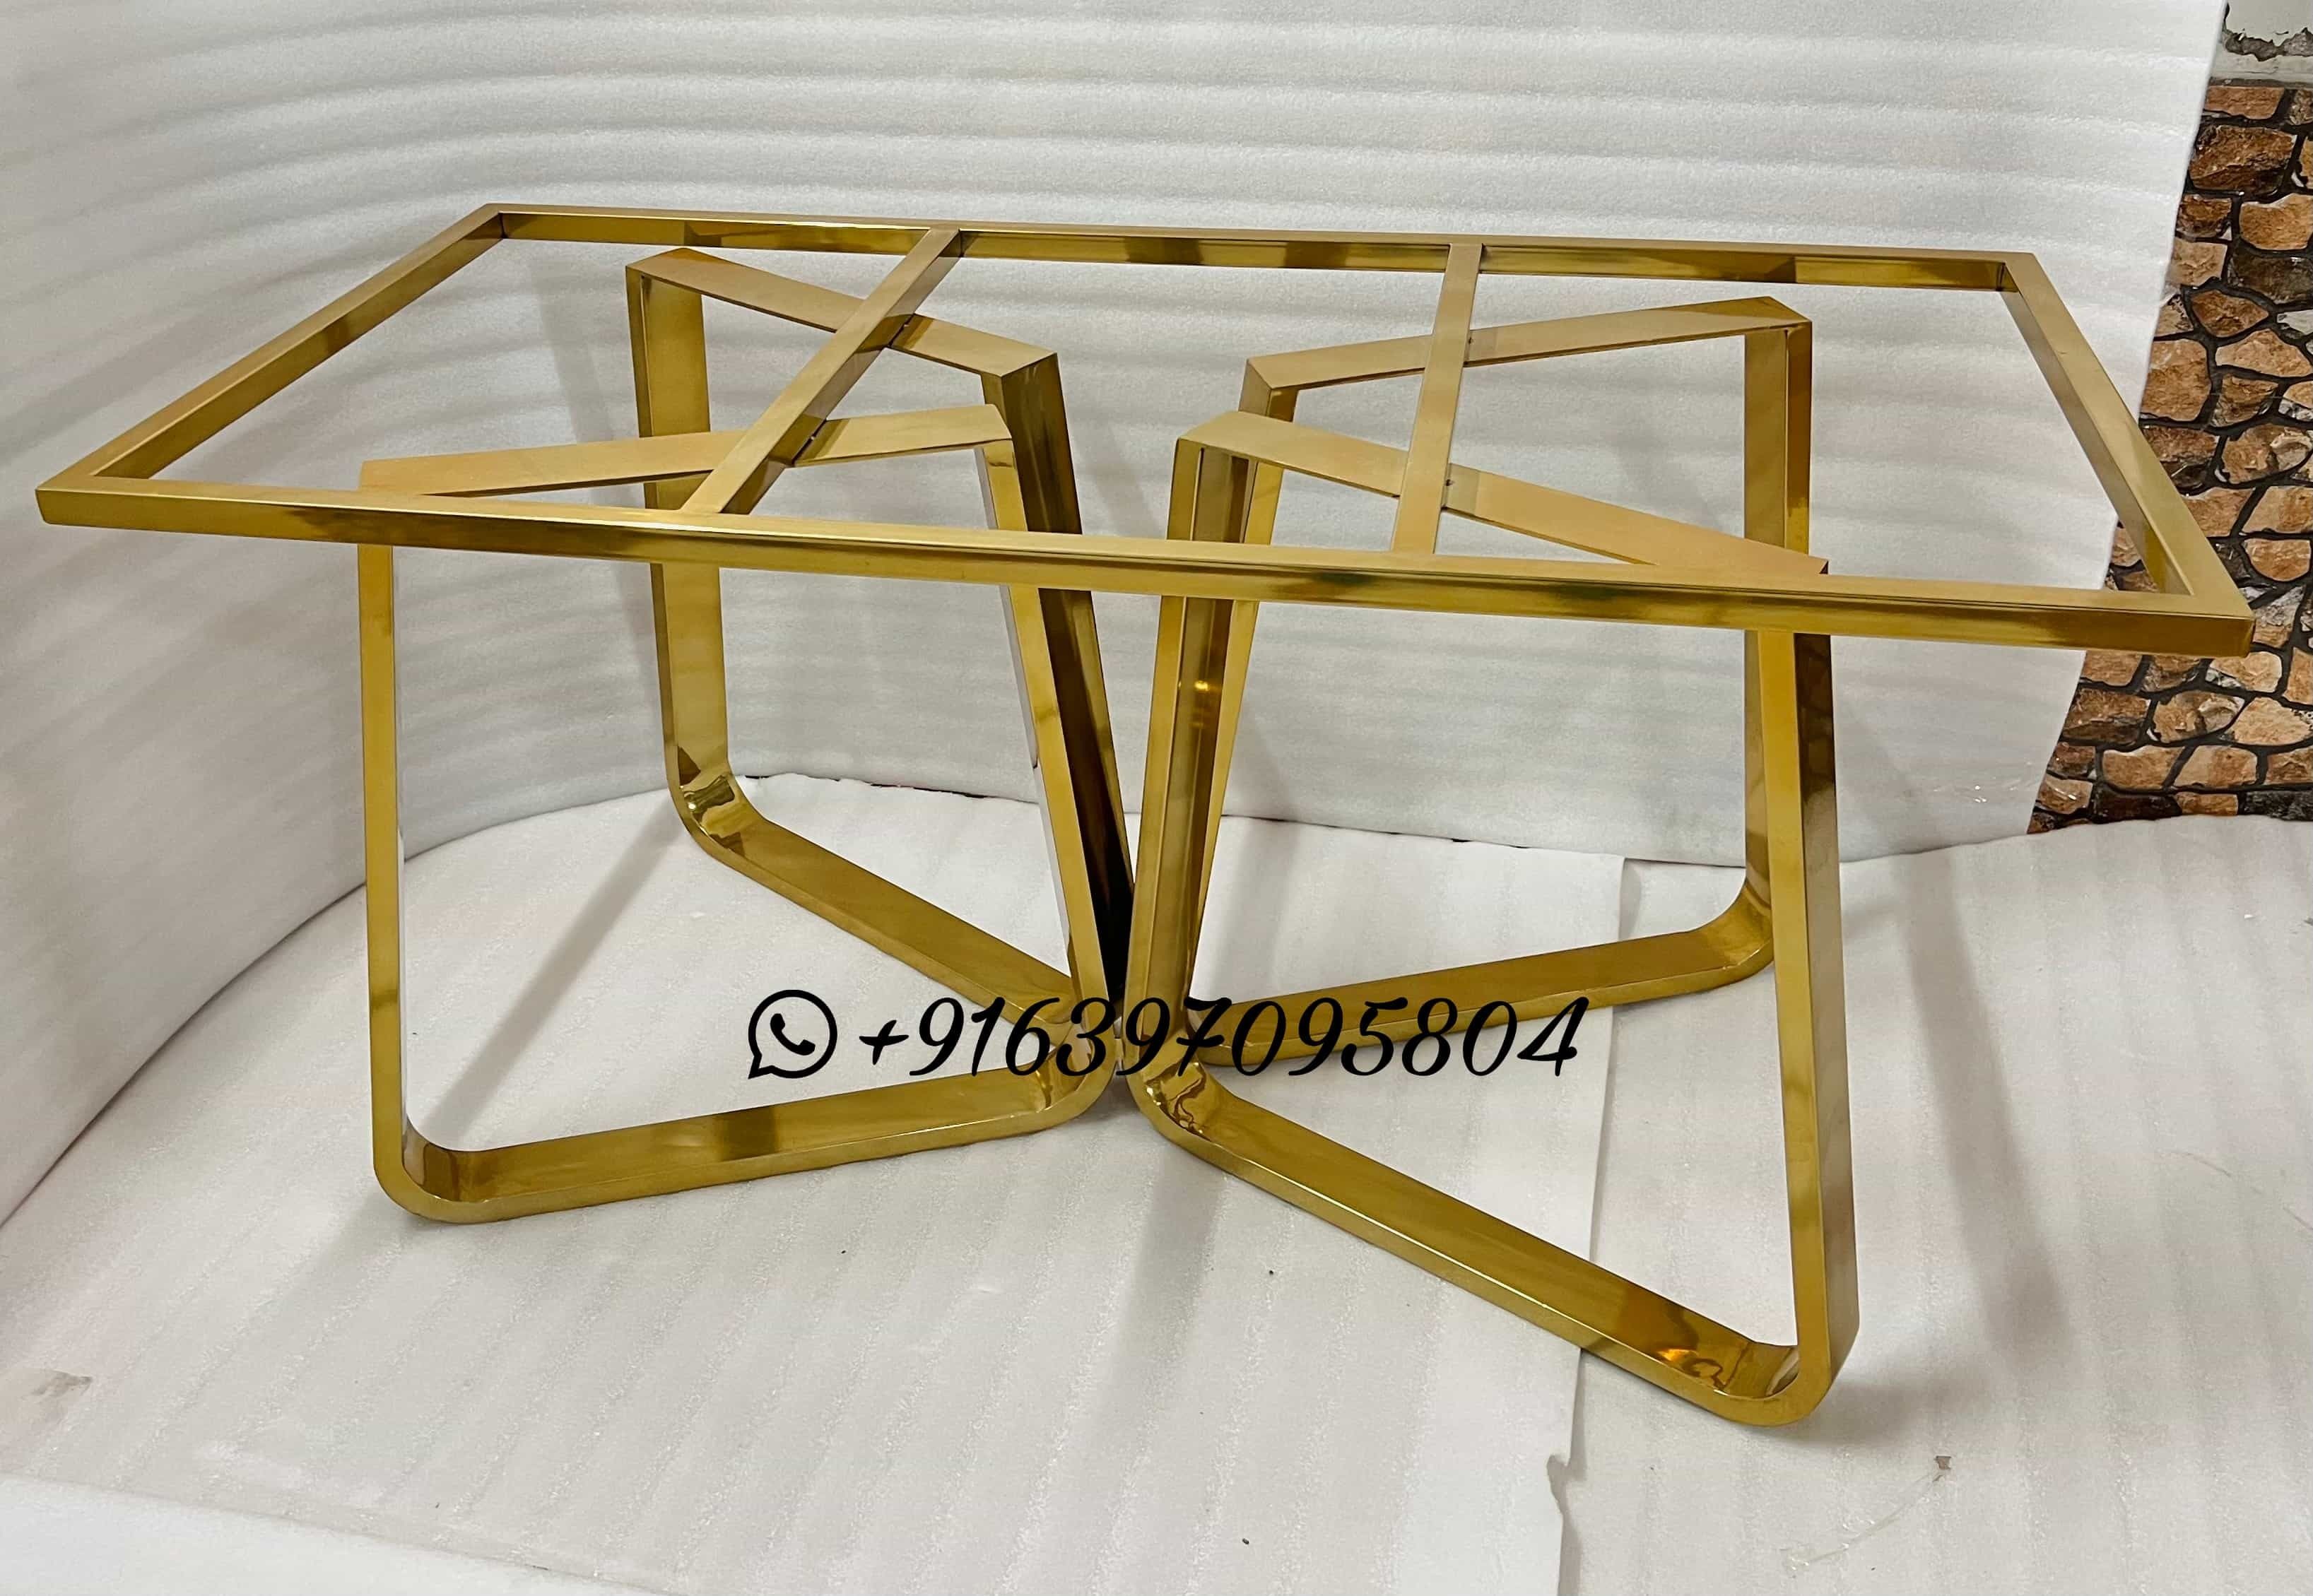 Dinning table set with chairs in stainless steel frames only